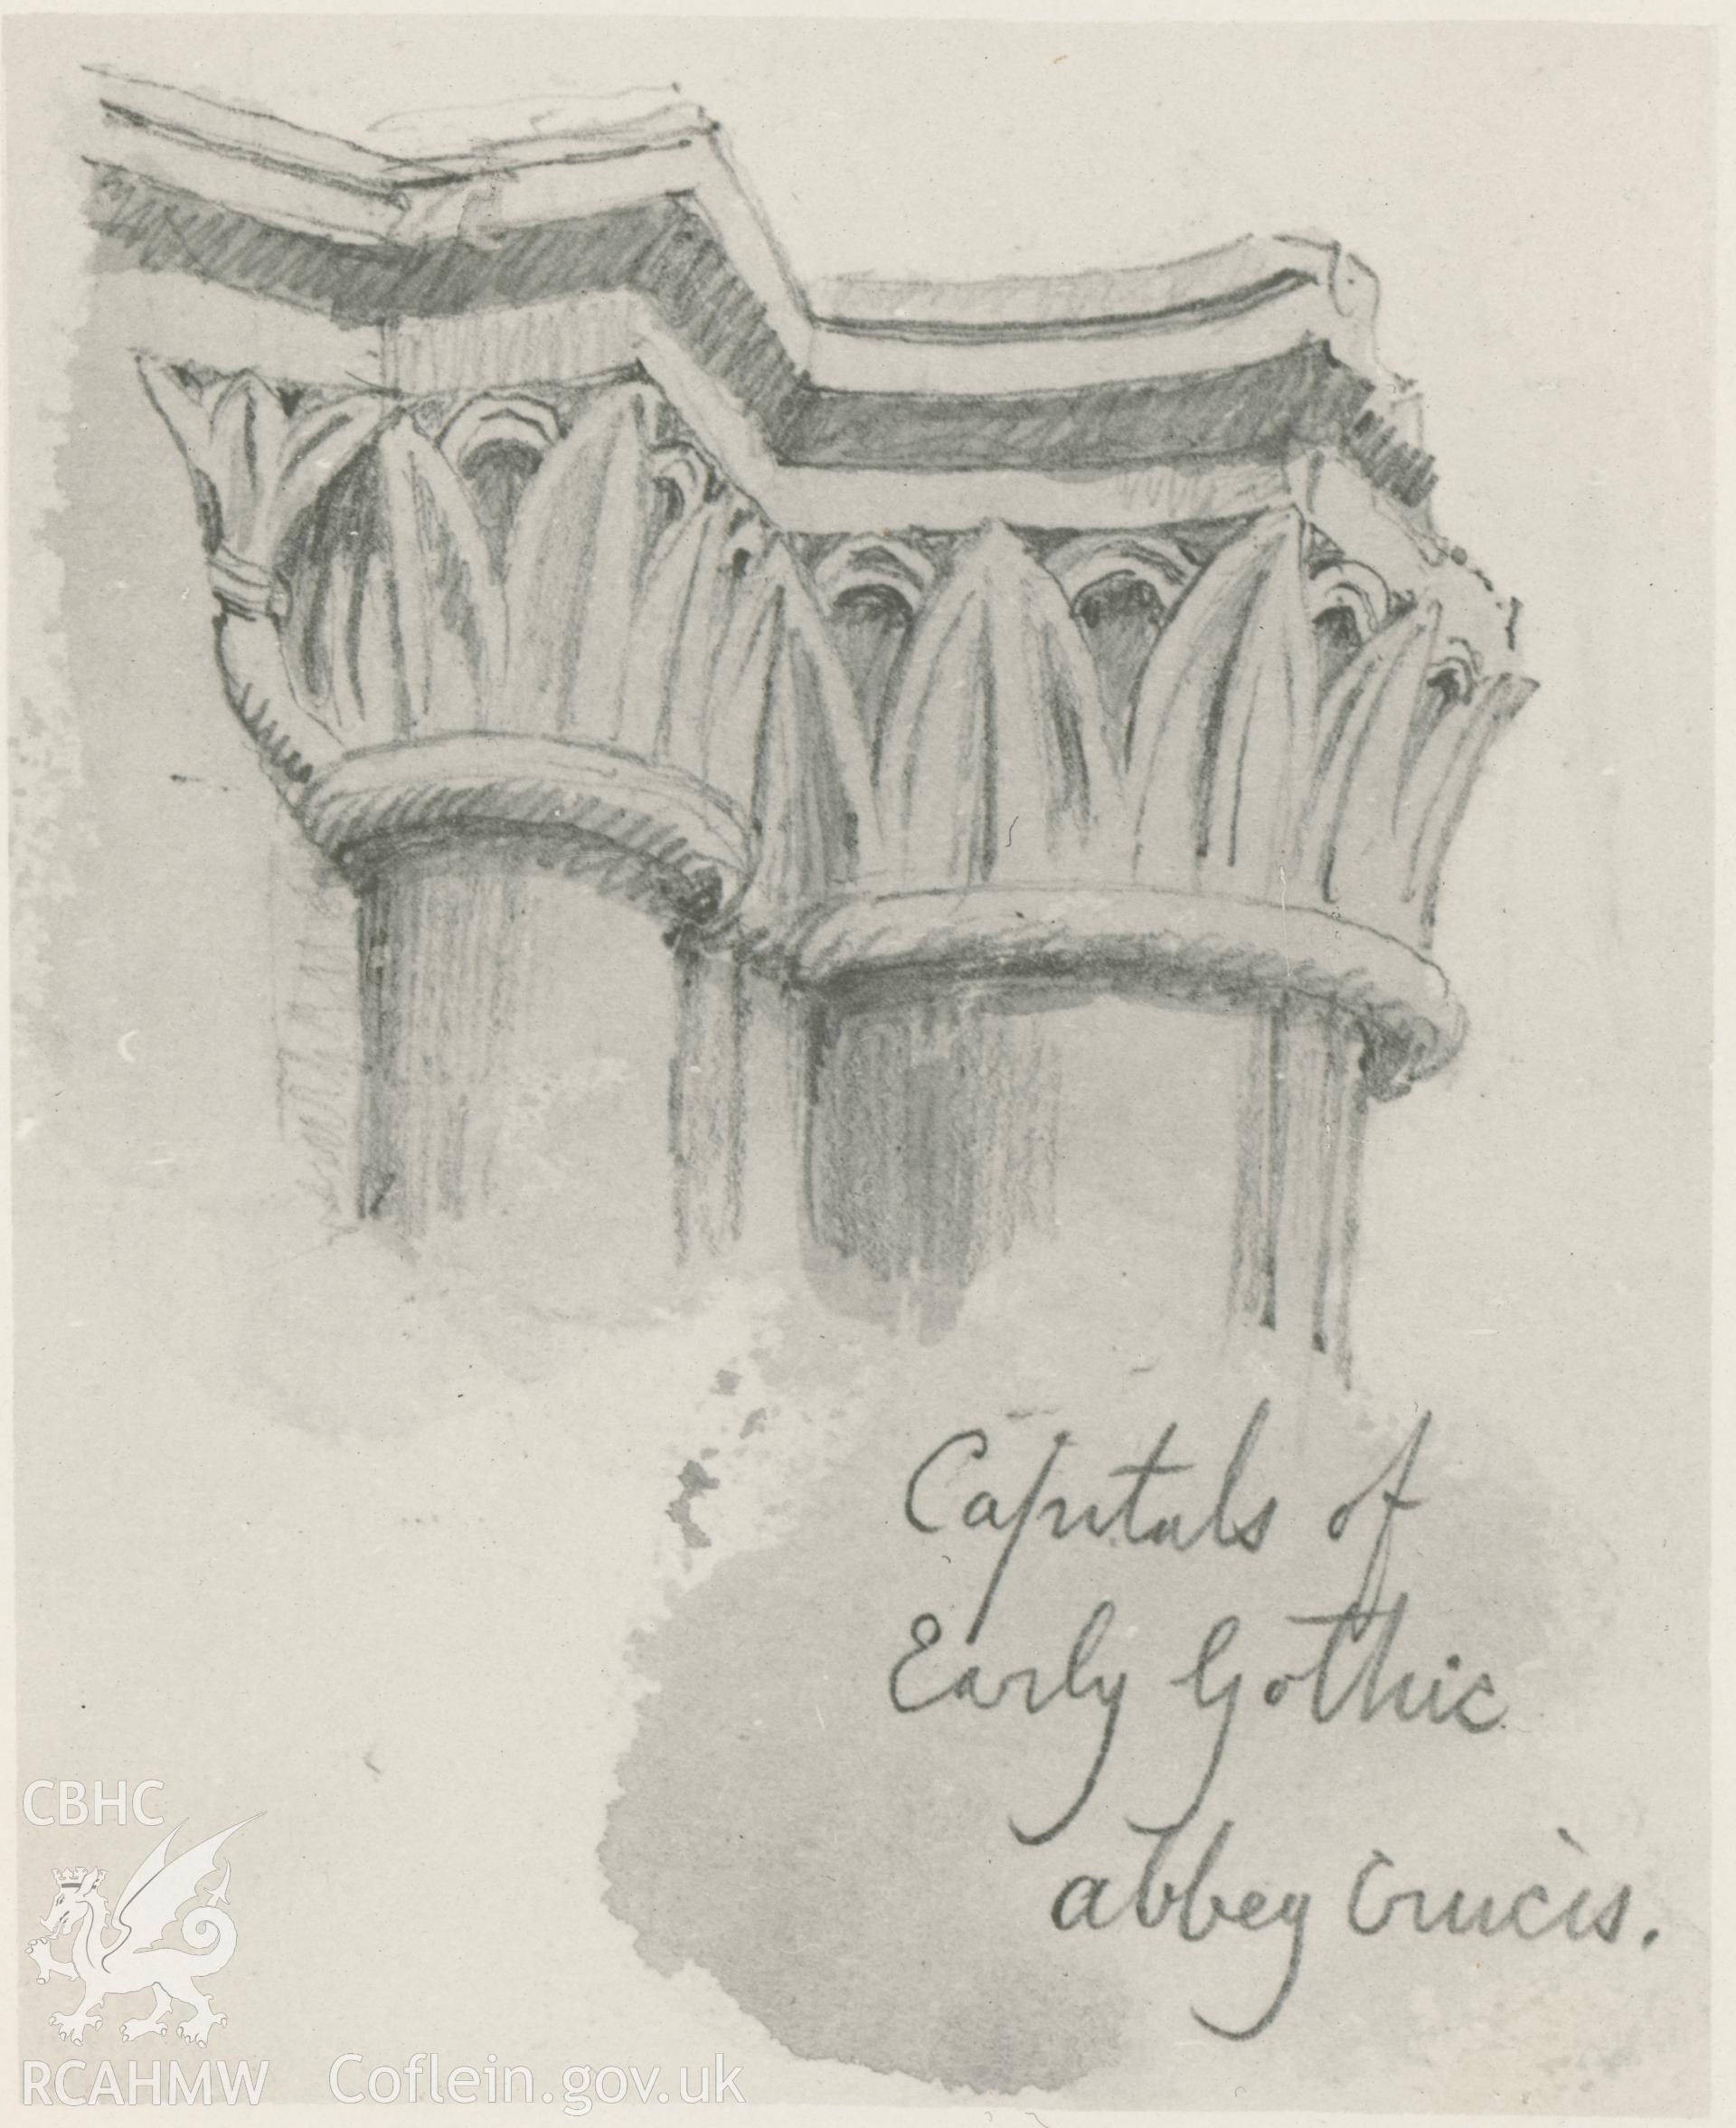 Photograph by Macbeth of an early sketch showing detail of capital at Valle Crucis Abbey.